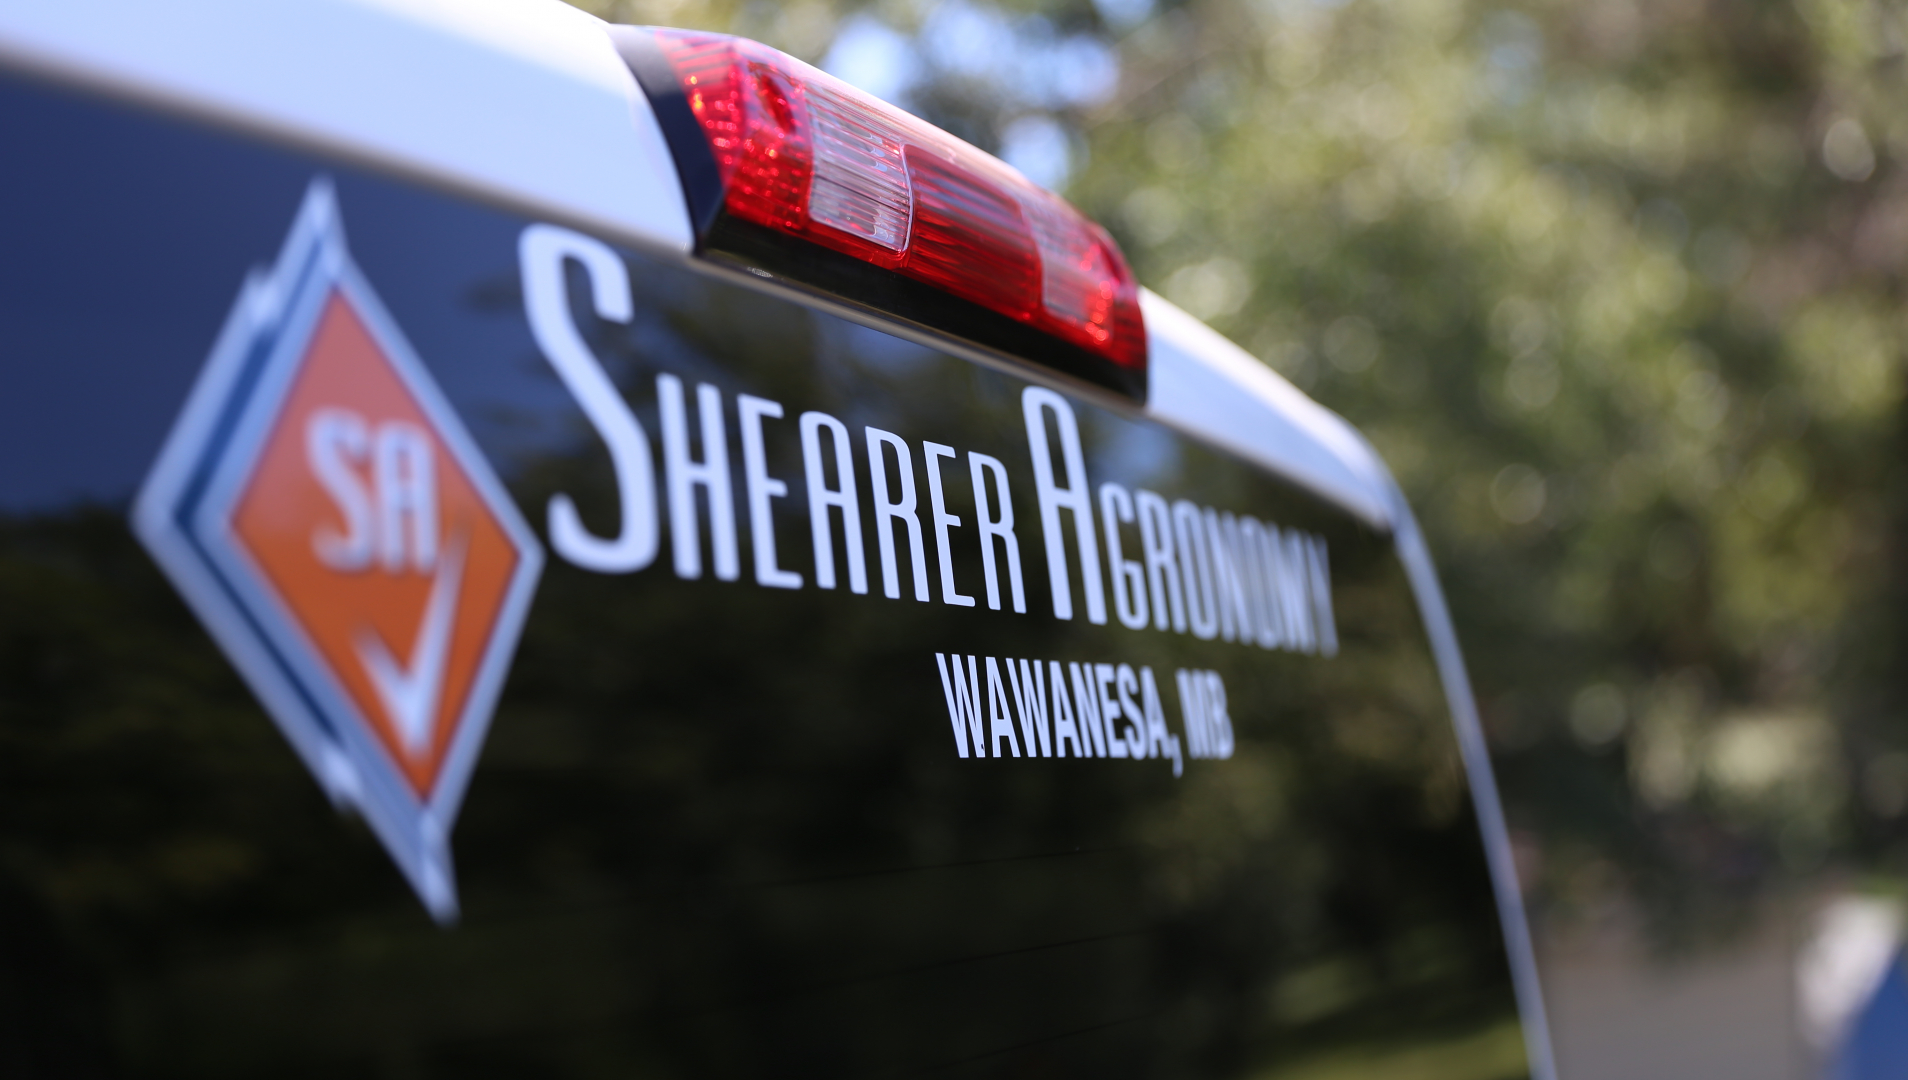 Shearer Agronomy company truck. The company is based out of Wawanesa, Manitoba. 